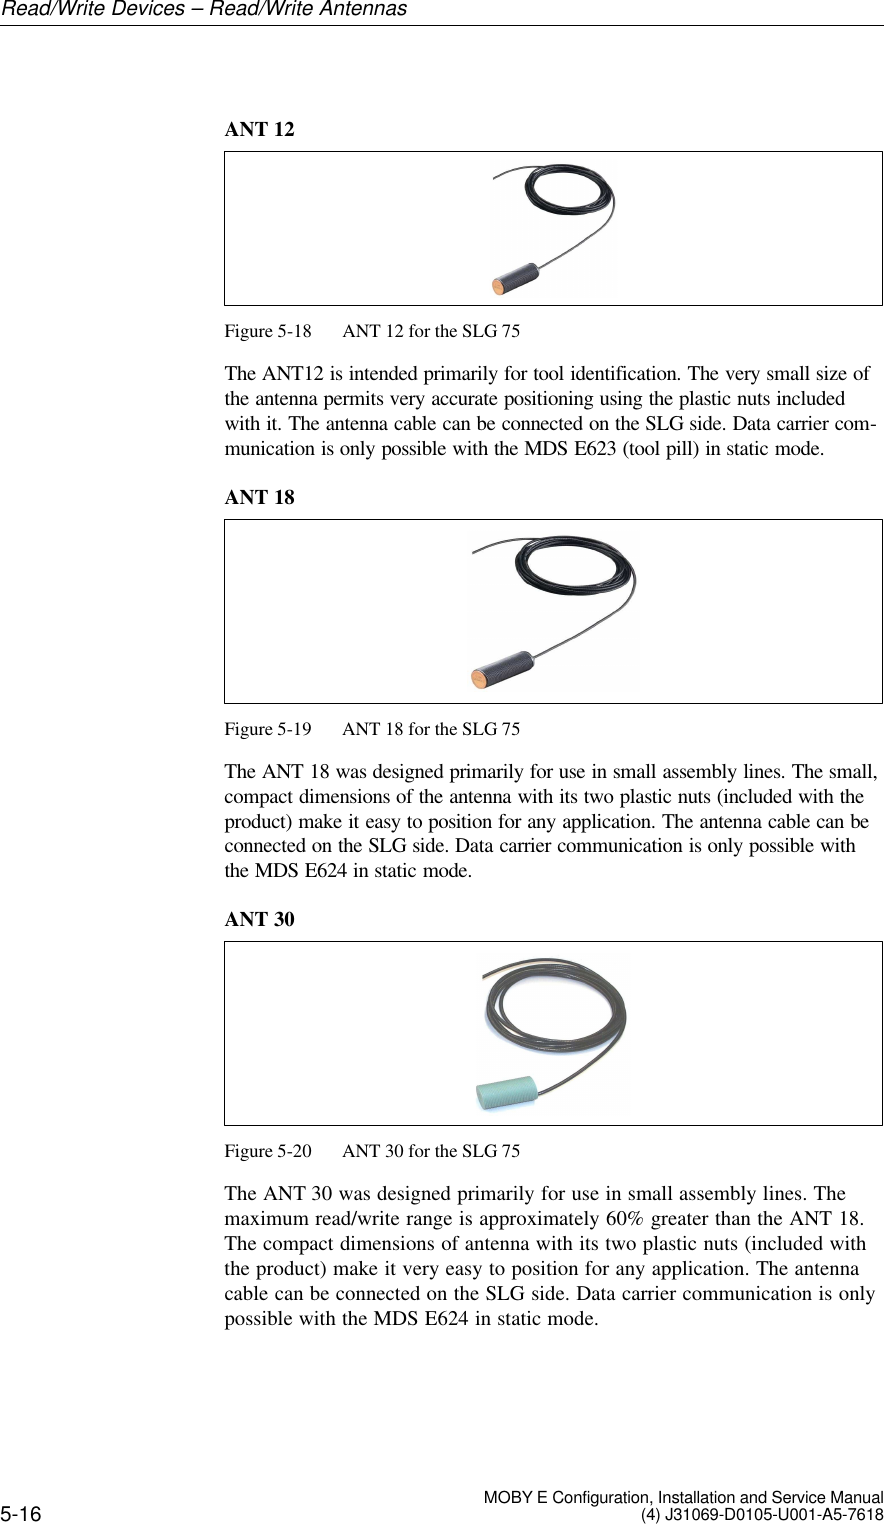 5-16 MOBY E Configuration, Installation and Service Manual(4) J31069-D0105-U001-A5-7618ANT 12Figure 5-18 ANT 12 for the SLG 75The ANT12 is intended primarily for tool identification. The very small size ofthe antenna permits very accurate positioning using the plastic nuts includedwith it. The antenna cable can be connected on the SLG side. Data carrier com-munication is only possible with the MDS E623 (tool pill) in static mode.ANT 18Figure 5-19 ANT 18 for the SLG 75The ANT 18 was designed primarily for use in small assembly lines. The small,compact dimensions of the antenna with its two plastic nuts (included with theproduct) make it easy to position for any application. The antenna cable can beconnected on the SLG side. Data carrier communication is only possible withthe MDS E624 in static mode.ANT 30Figure 5-20 ANT 30 for the SLG 75The ANT 30 was designed primarily for use in small assembly lines. Themaximum read/write range is approximately 60% greater than the ANT 18.The compact dimensions of antenna with its two plastic nuts (included withthe product) make it very easy to position for any application. The antennacable can be connected on the SLG side. Data carrier communication is onlypossible with the MDS E624 in static mode.Read/Write Devices – Read/Write Antennas